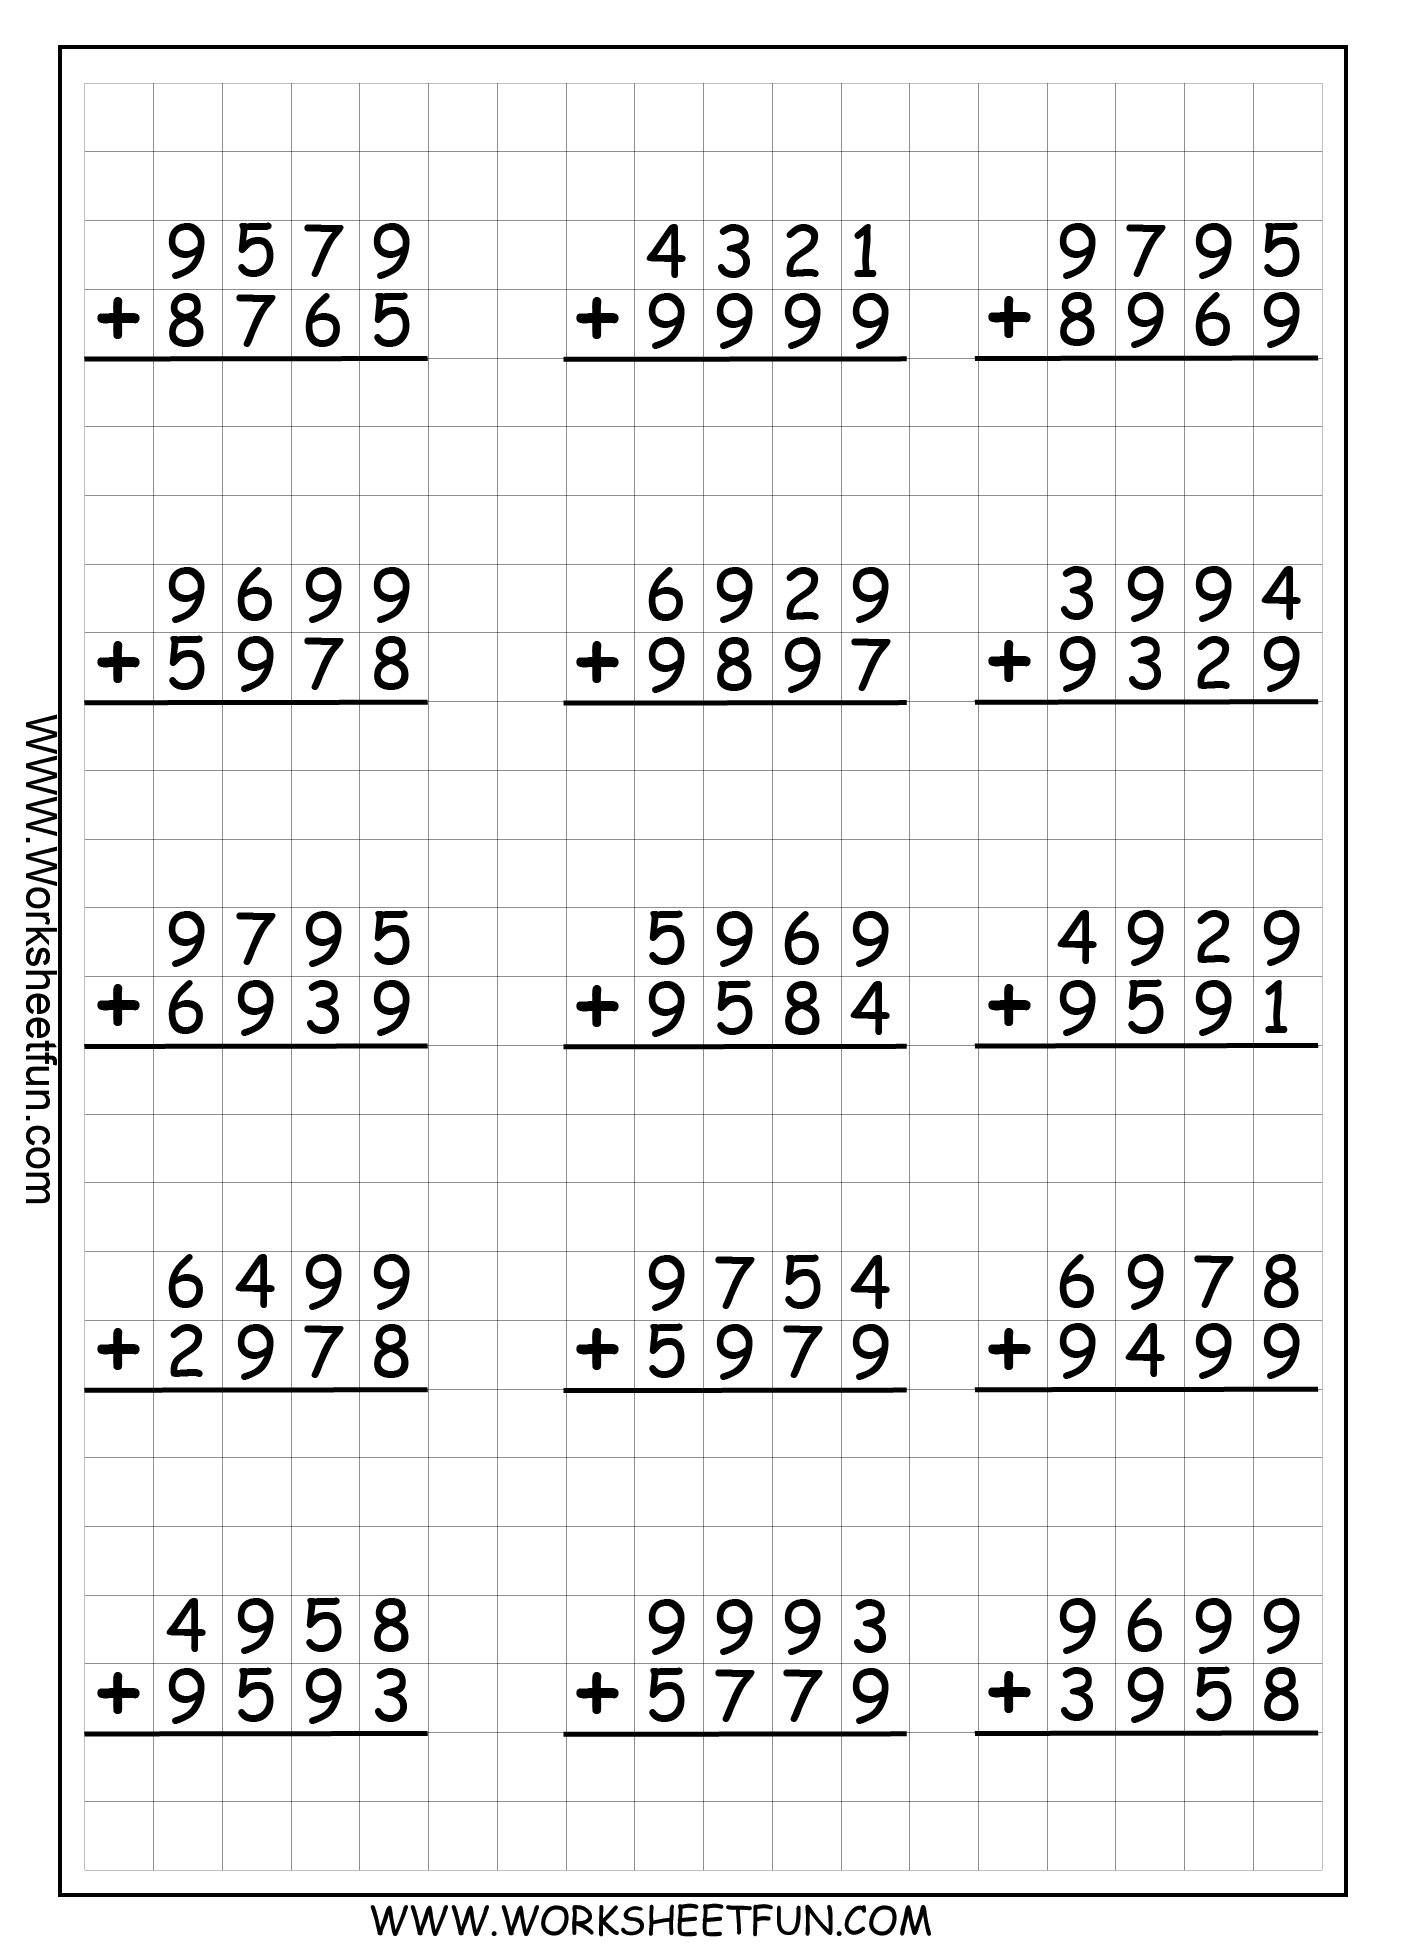 4 Digit Addition With Regrouping Carrying 9 Worksheets FREE Printable Worksheets 